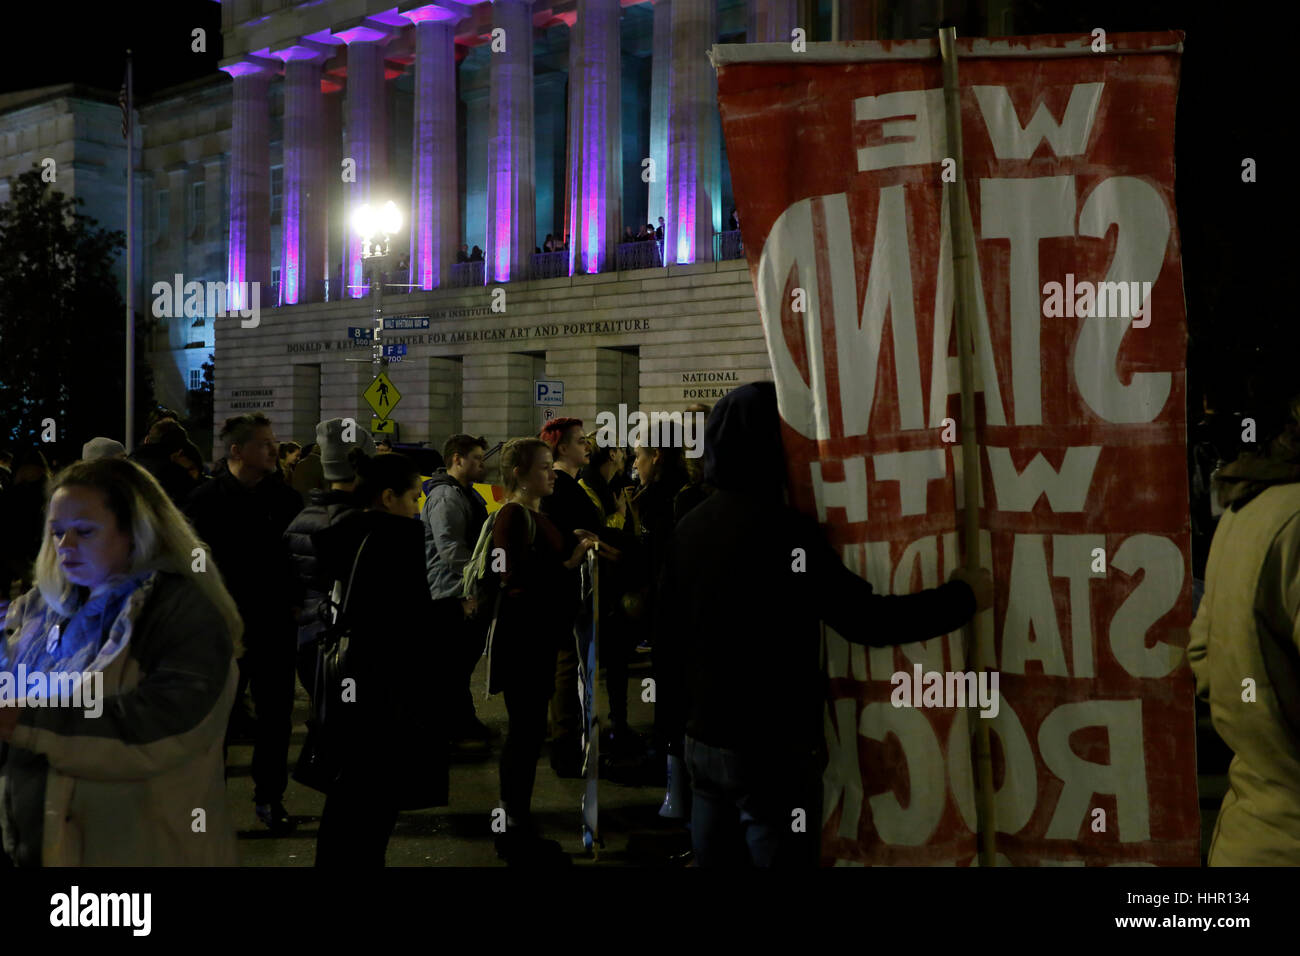 Washington, DC, USA. 19th January, 2017. Protesters with the Indigenous Environmental Network outside the Oklahoma State Society gala in the Smithsonian National Portrait Gallery. Protesters want gala attendees to know their party was sponsored by companies invested in the dakota access pipeline, and other major fossil fuel infrastructure. Stock Photo